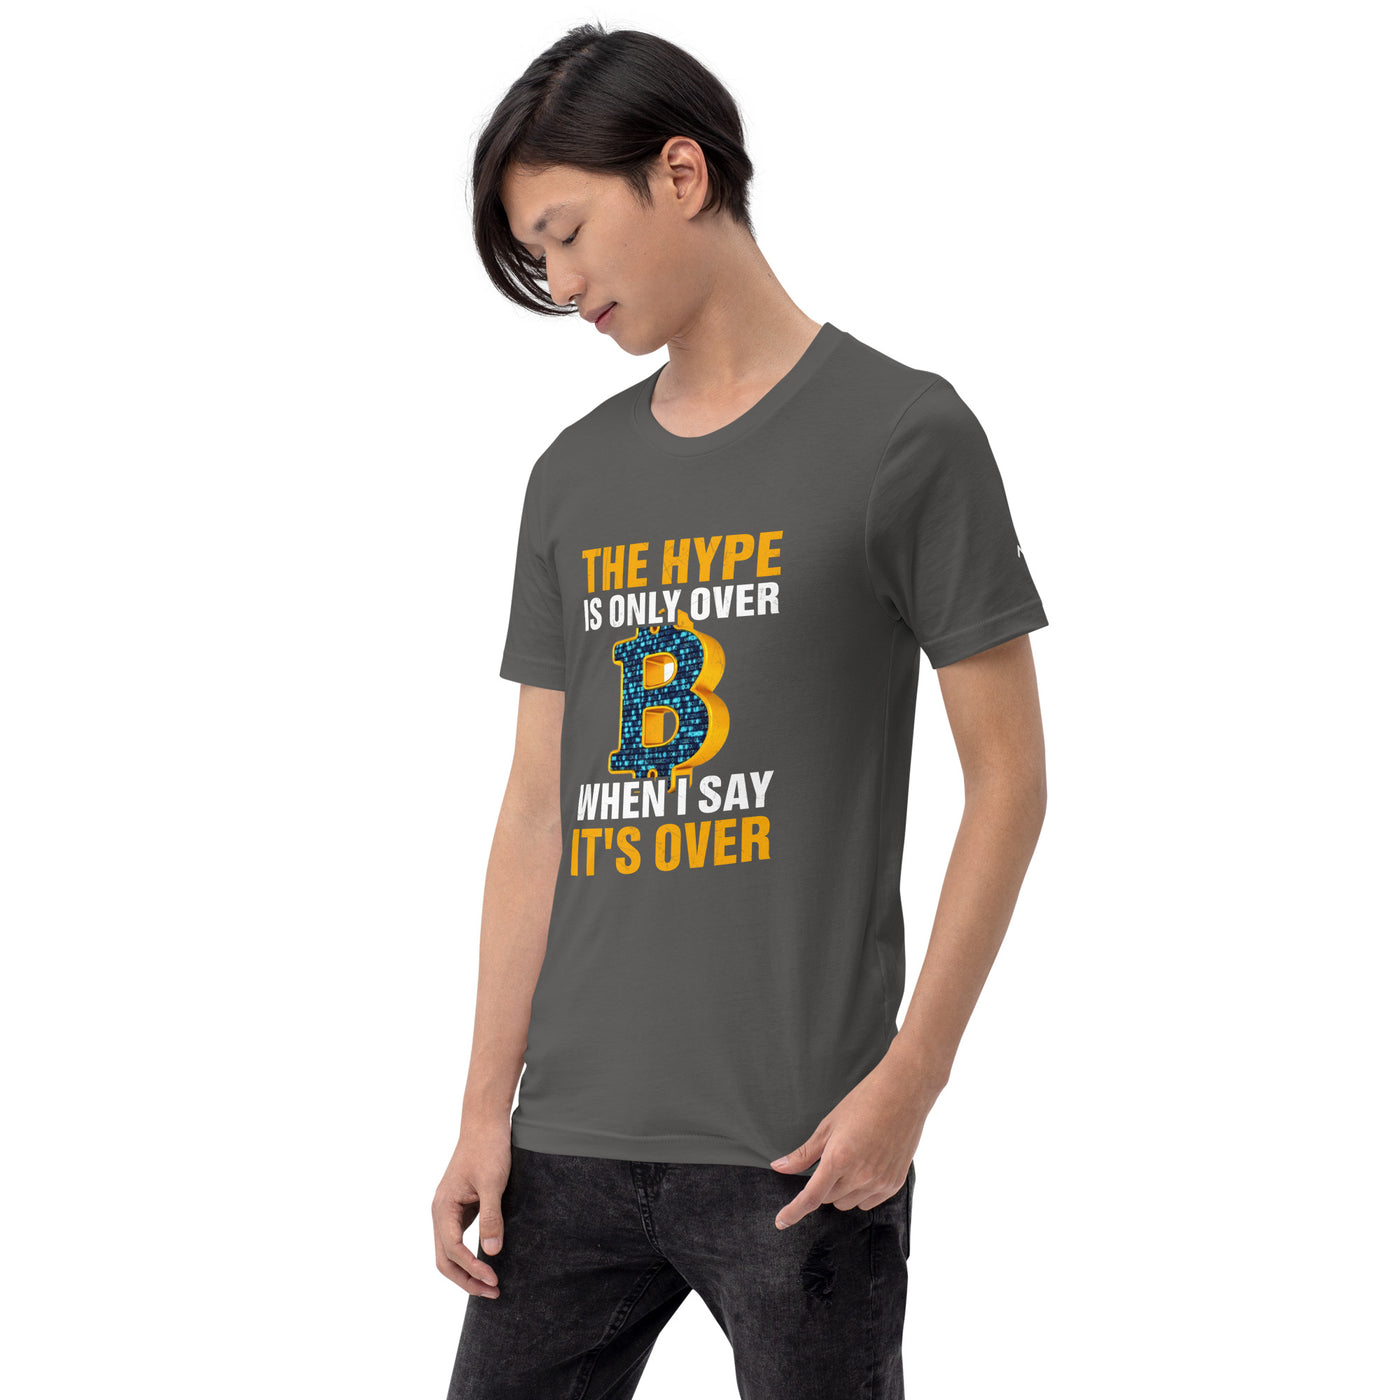 Bitcoin: The Hype is only over, when I said it's over - Unisex t-shirt